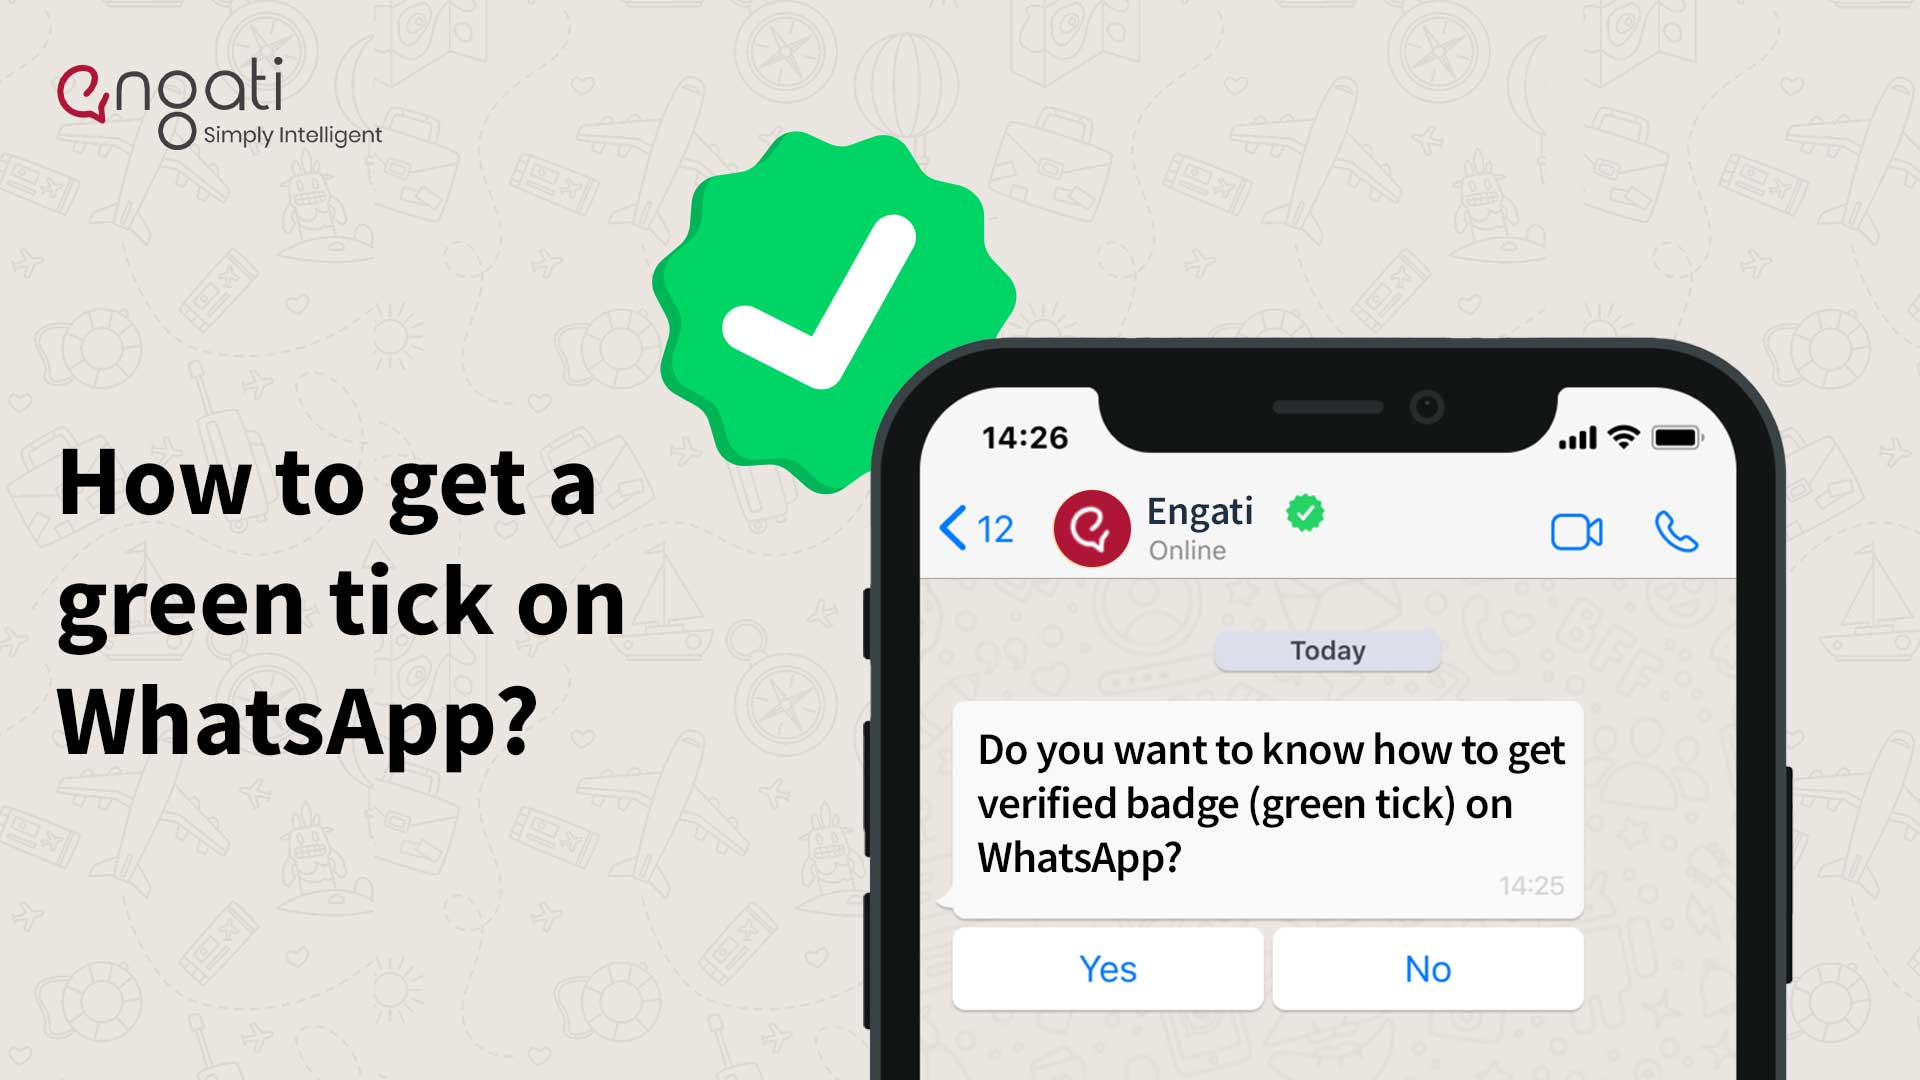 How to get green tick on WhatsApp